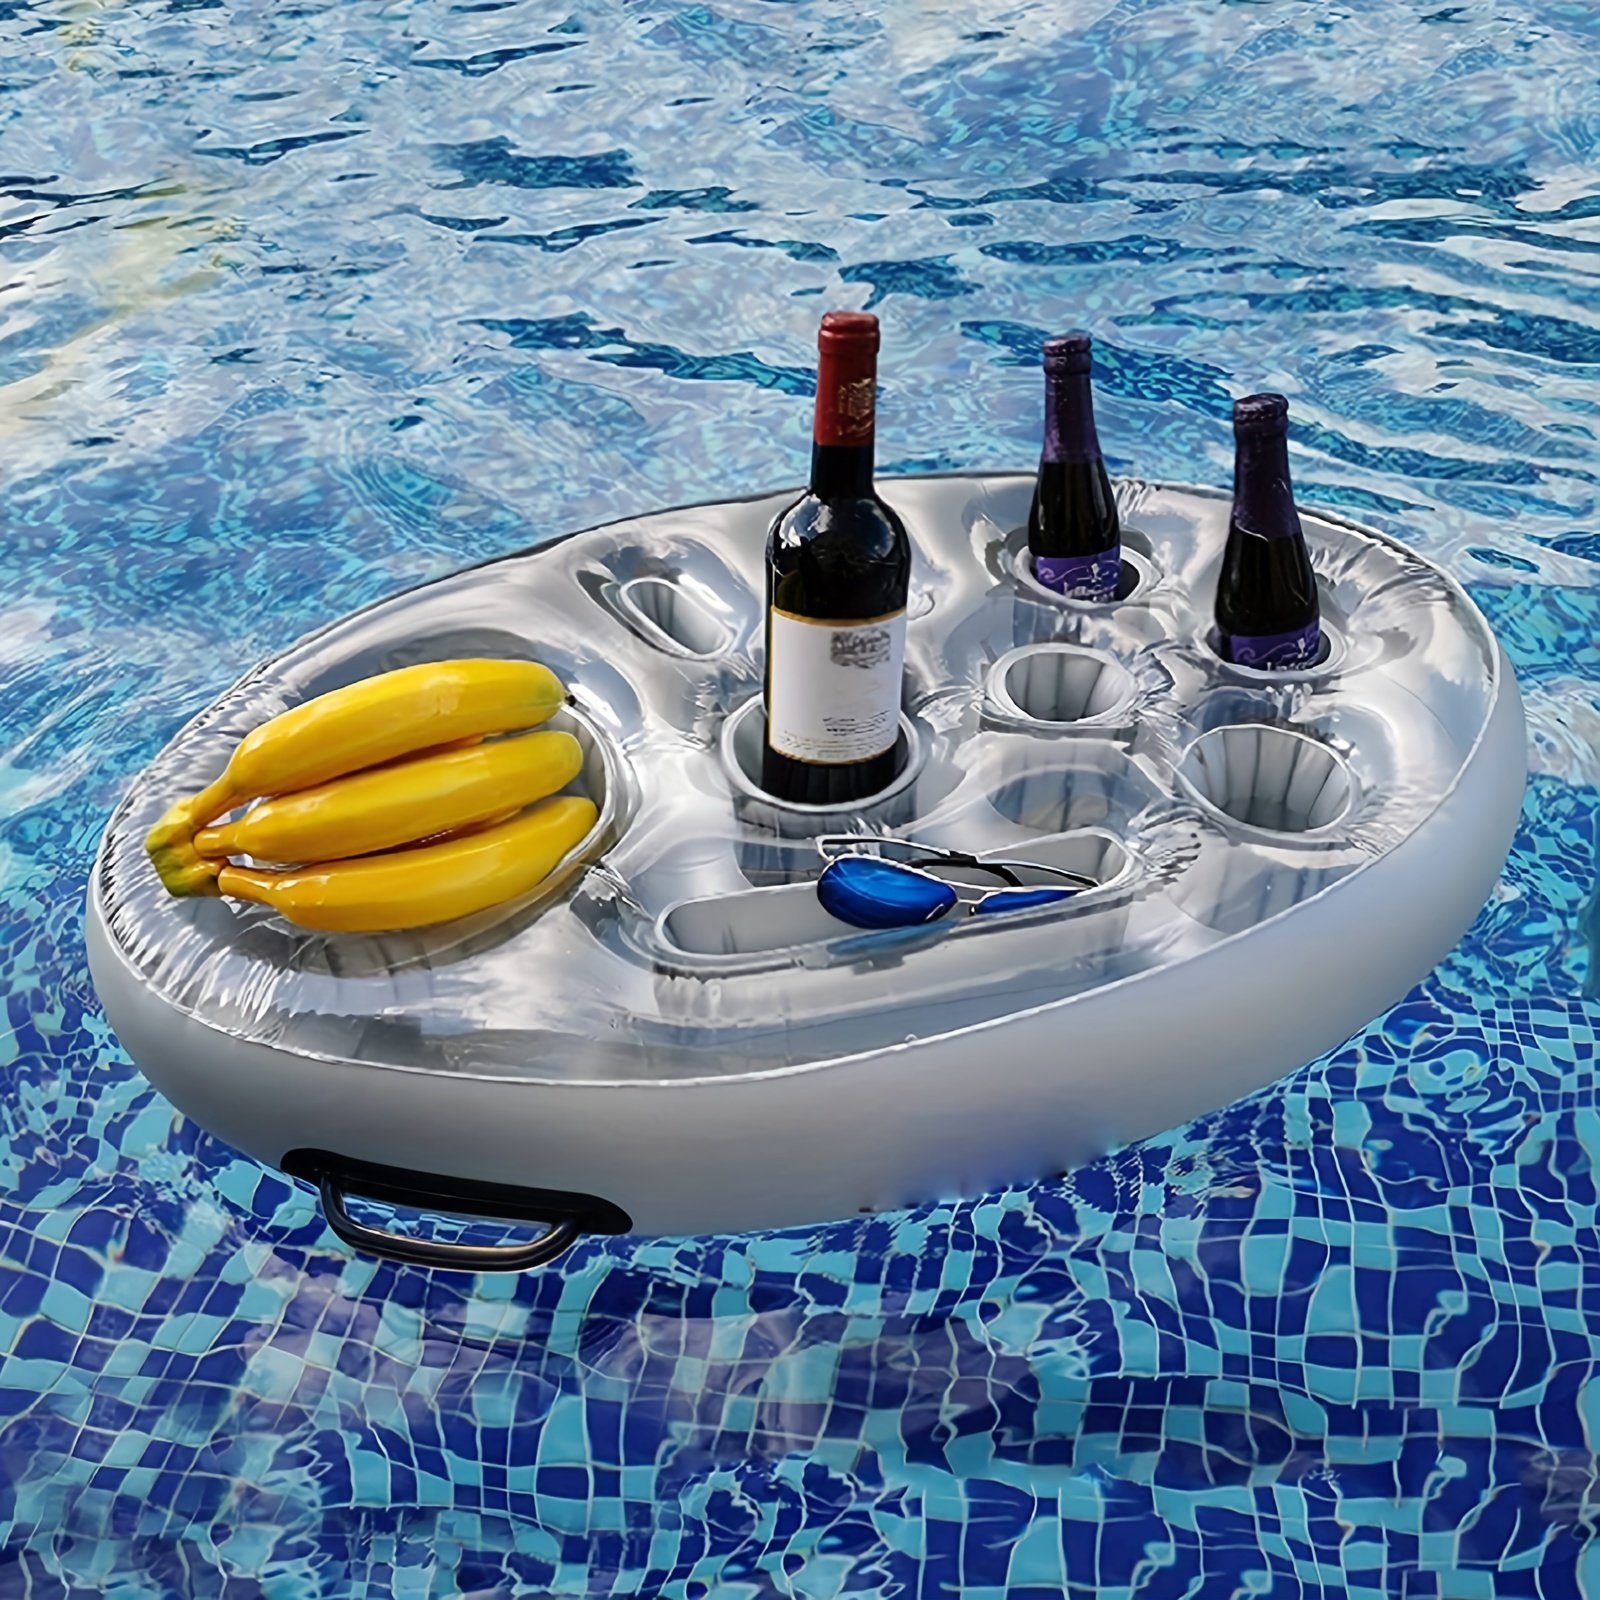 🔥Hot Sale🔥Portable Swimming Pool Drink Holder🍹